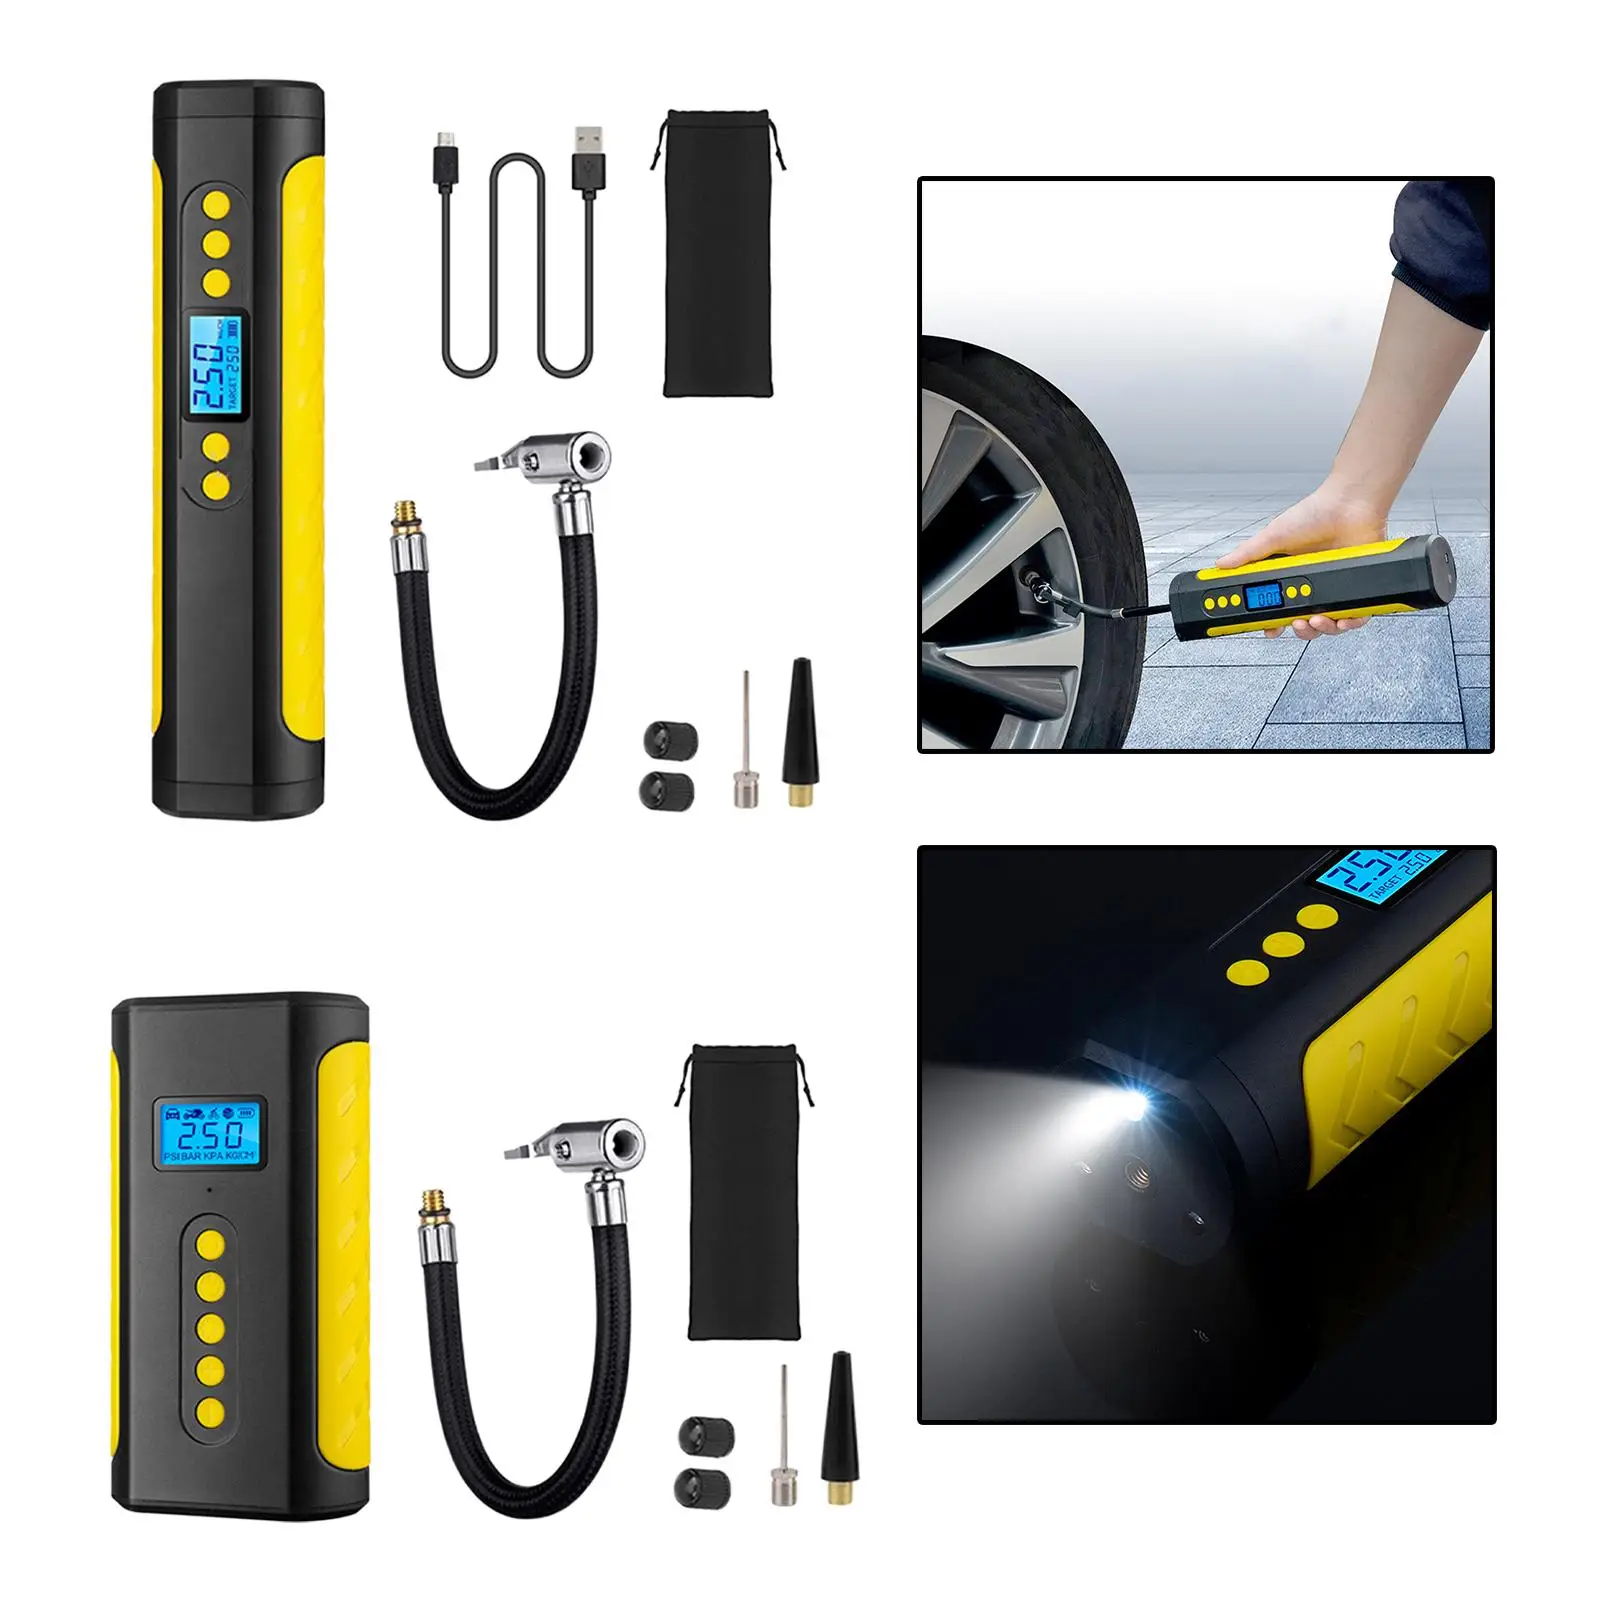 Portable Air Compressor Fast Inflation Handheld Tire Inflator for